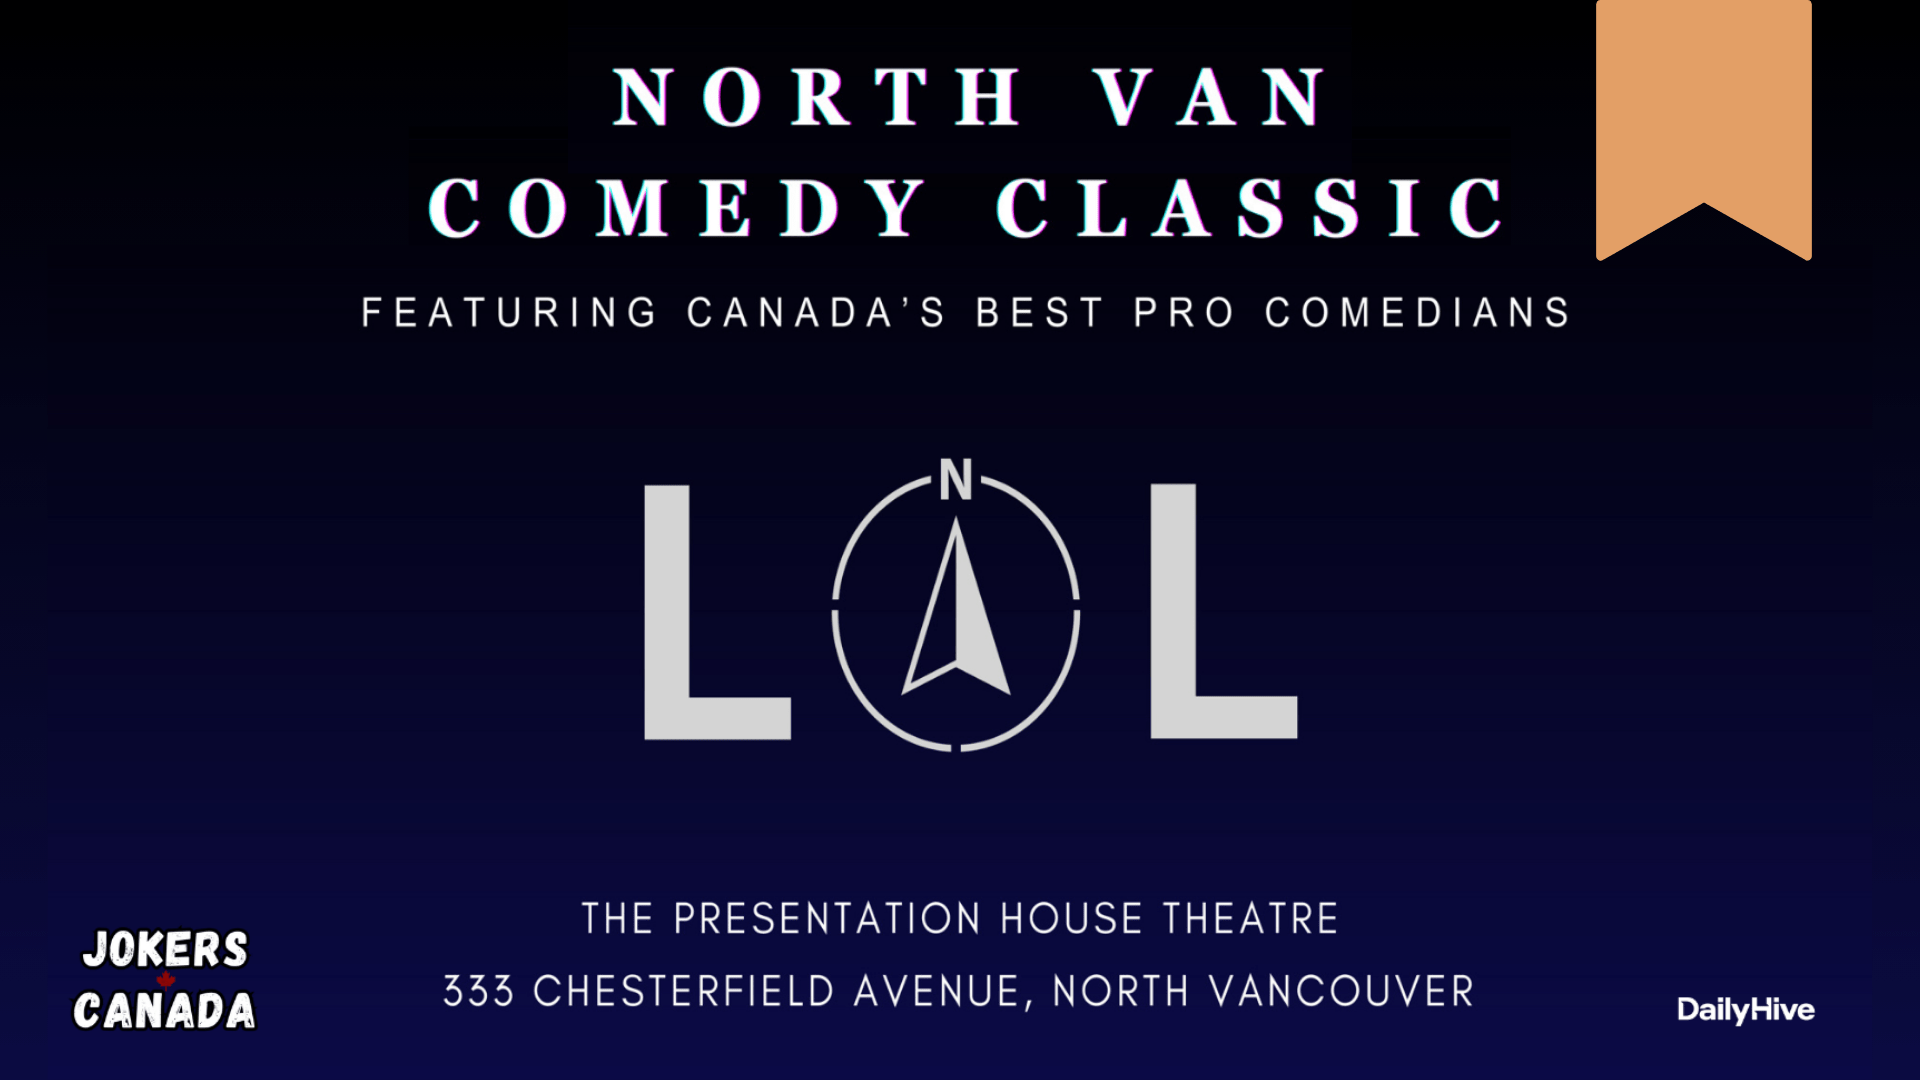 A black and dark blue banner image reading: "North Van Comedy Classic", "Featuring Canada's Best Pro Comedians", "The Presentation House Theatre", "333 Chesterfield Avenue, North Vancouver". In the center of the banner with is a L-O-L with a compass pointing North replacing the letter O. At the bottom right corner, there is the Jokers Canada logo. At the bottom left corner, there is the DailyHive logo.